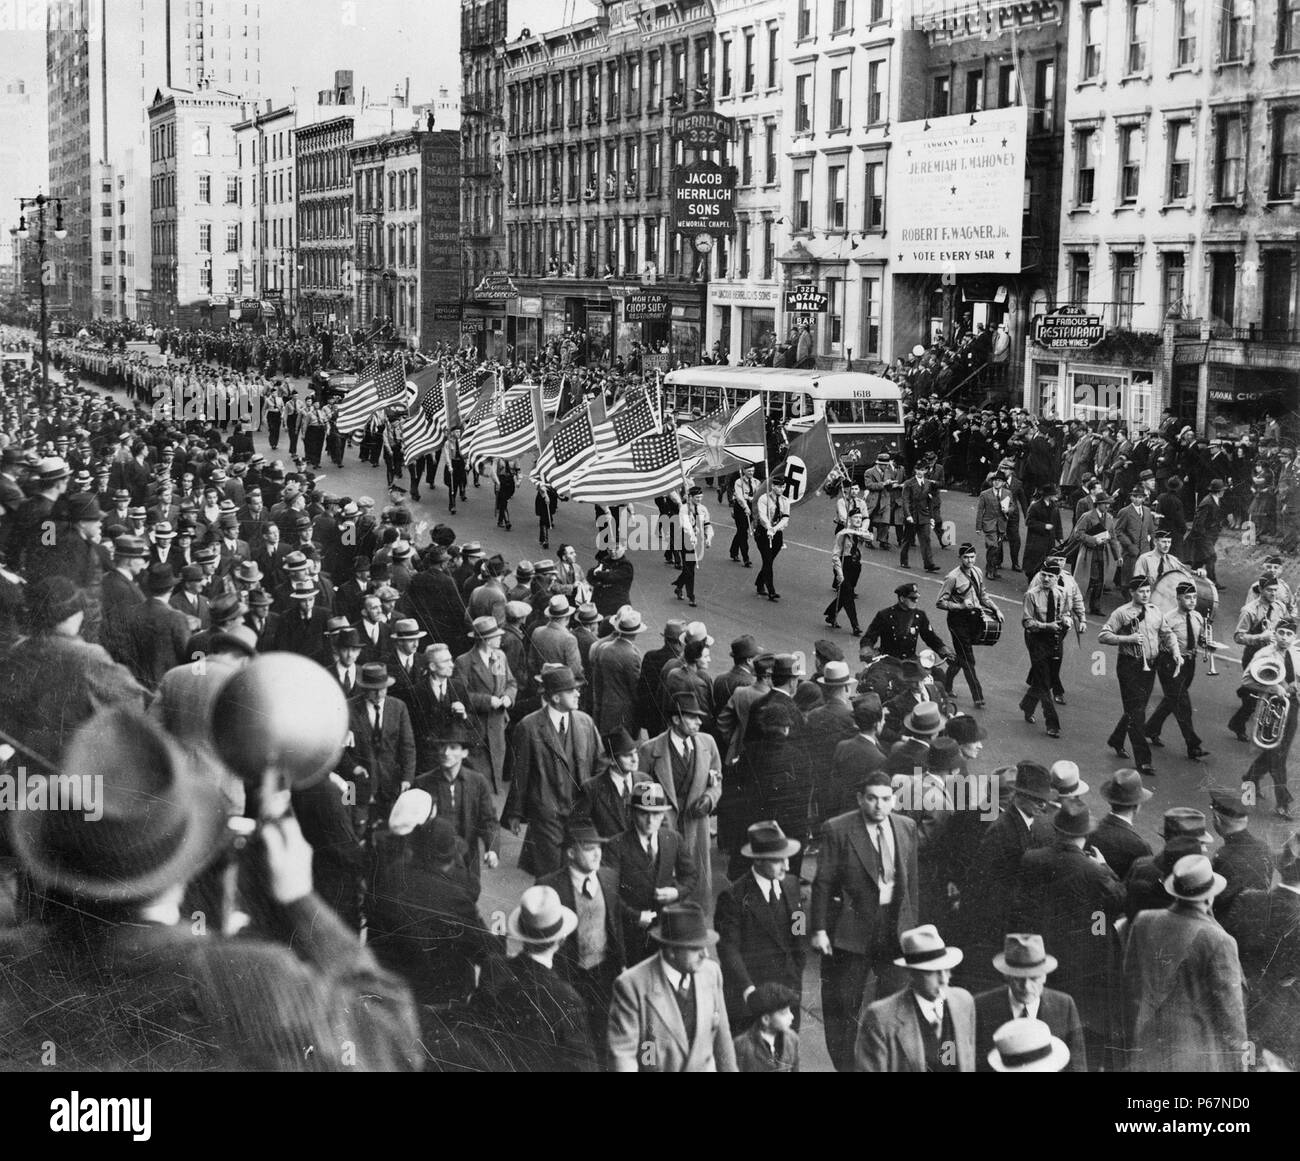 American Nazis parade on East 86th St, New York. Dated around 1939, During the Second World War. Stock Photo